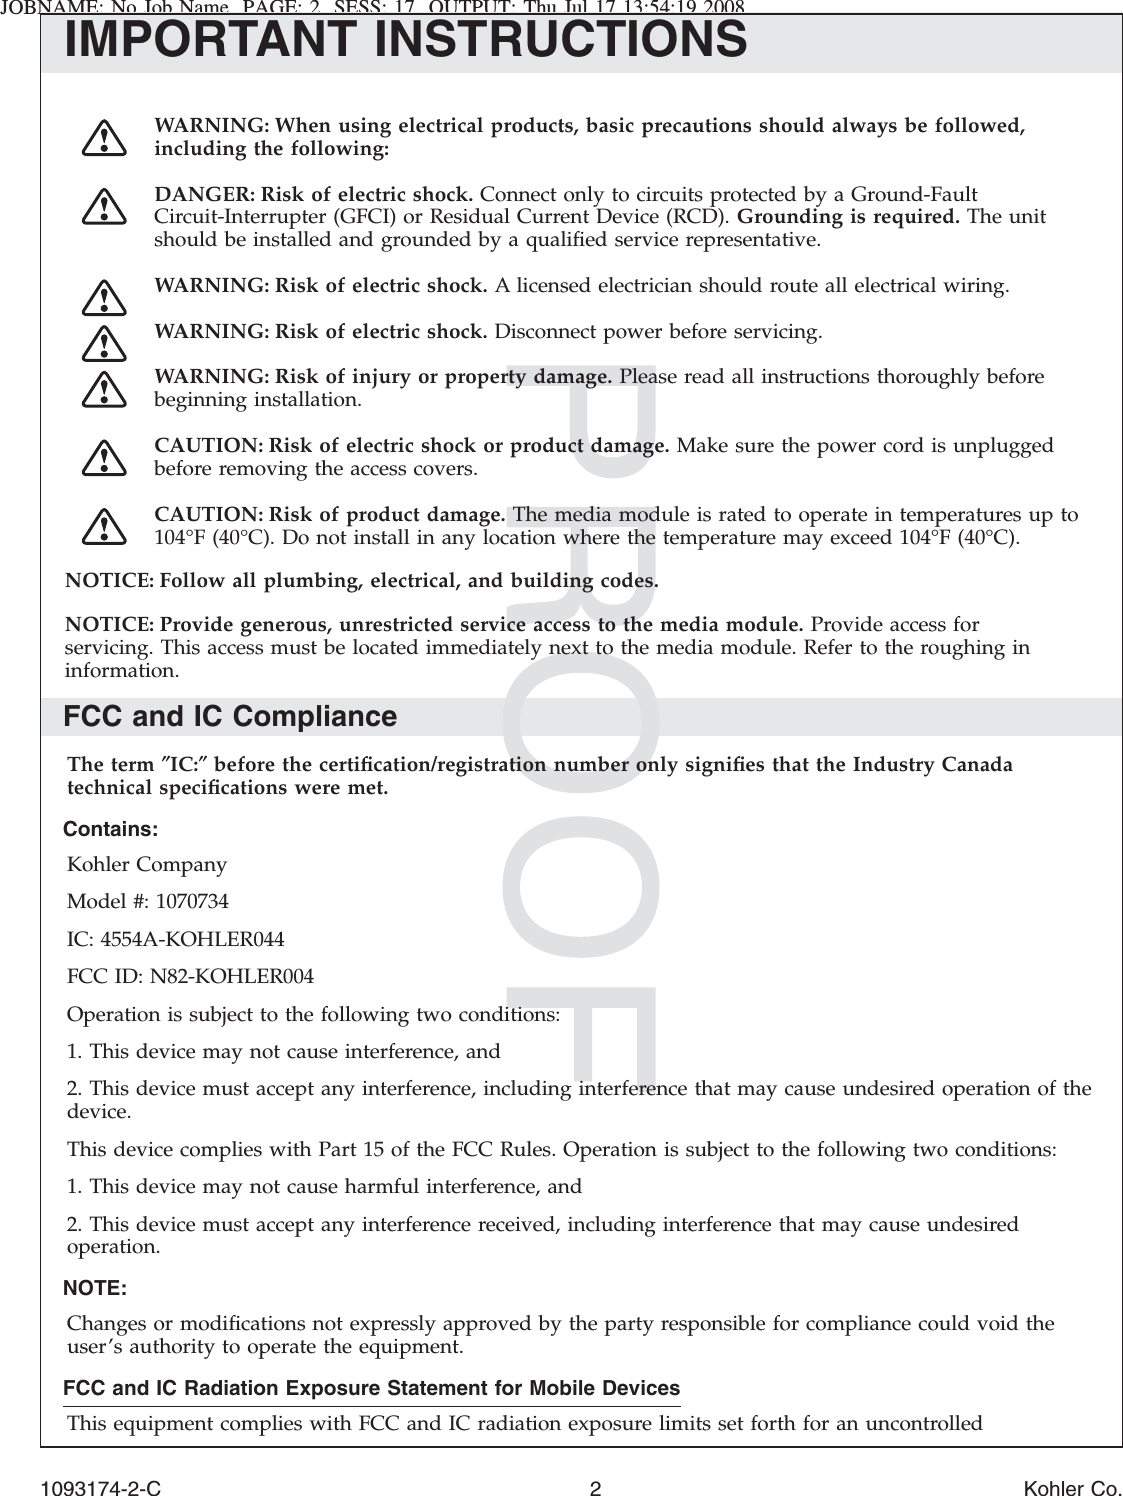 JOBNAME: No Job Name PAGE: 2 SESS: 17 OUTPUT: Thu Jul 17 13:54:19 2008IMPORTANT INSTRUCTIONSWARNING: When using electrical products, basic precautions should always be followed,including the following:DANGER: Risk of electric shock. Connect only to circuits protected by a Ground-FaultCircuit-Interrupter (GFCI) or Residual Current Device (RCD). Grounding is required. The unitshould be installed and grounded by a qualiﬁed service representative.WARNING: Risk of electric shock. A licensed electrician should route all electrical wiring.WARNING: Risk of electric shock. Disconnect power before servicing.WARNING: Risk of injury or property damage. Please read all instructions thoroughly beforebeginning installation.CAUTION: Risk of electric shock or product damage. Make sure the power cord is unpluggedbefore removing the access covers.CAUTION: Risk of product damage. The media module is rated to operate in temperatures up to104°F (40°C). Do not install in any location where the temperature may exceed 104°F (40°C).NOTICE: Follow all plumbing, electrical, and building codes.NOTICE: Provide generous, unrestricted service access to the media module. Provide access forservicing. This access must be located immediately next to the media module. Refer to the roughing ininformation.FCC and IC ComplianceThe term ″IC:″before the certiﬁcation/registration number only signiﬁes that the Industry Canadatechnical speciﬁcations were met.Contains:Kohler CompanyModel #: 1070734IC: 4554A-KOHLER044FCC ID: N82-KOHLER004Operation is subject to the following two conditions:1. This device may not cause interference, and2. This device must accept any interference, including interference that may cause undesired operation of thedevice.This device complies with Part 15 of the FCC Rules. Operation is subject to the following two conditions:1. This device may not cause harmful interference, and2. This device must accept any interference received, including interference that may cause undesiredoperation.NOTE:Changes or modiﬁcations not expressly approved by the party responsible for compliance could void theuser’s authority to operate the equipment.FCC and IC Radiation Exposure Statement for Mobile DevicesThis equipment complies with FCC and IC radiation exposure limits set forth for an uncontrolled1093174-2-C 2 Kohler Co.